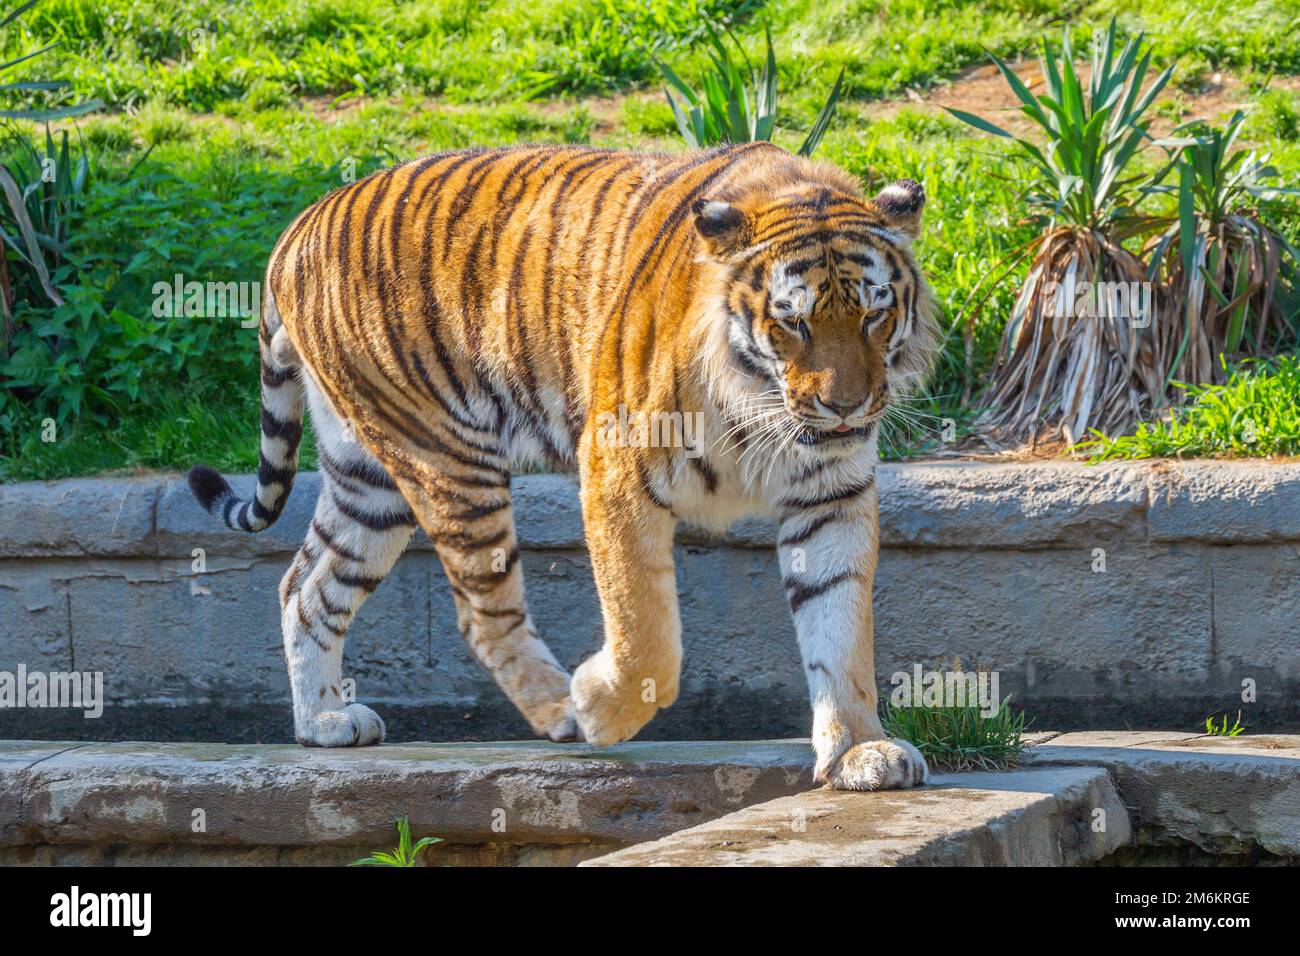 Tiger in a wildlife zoo - one of the biggest carnivore in nature. Stock Photo